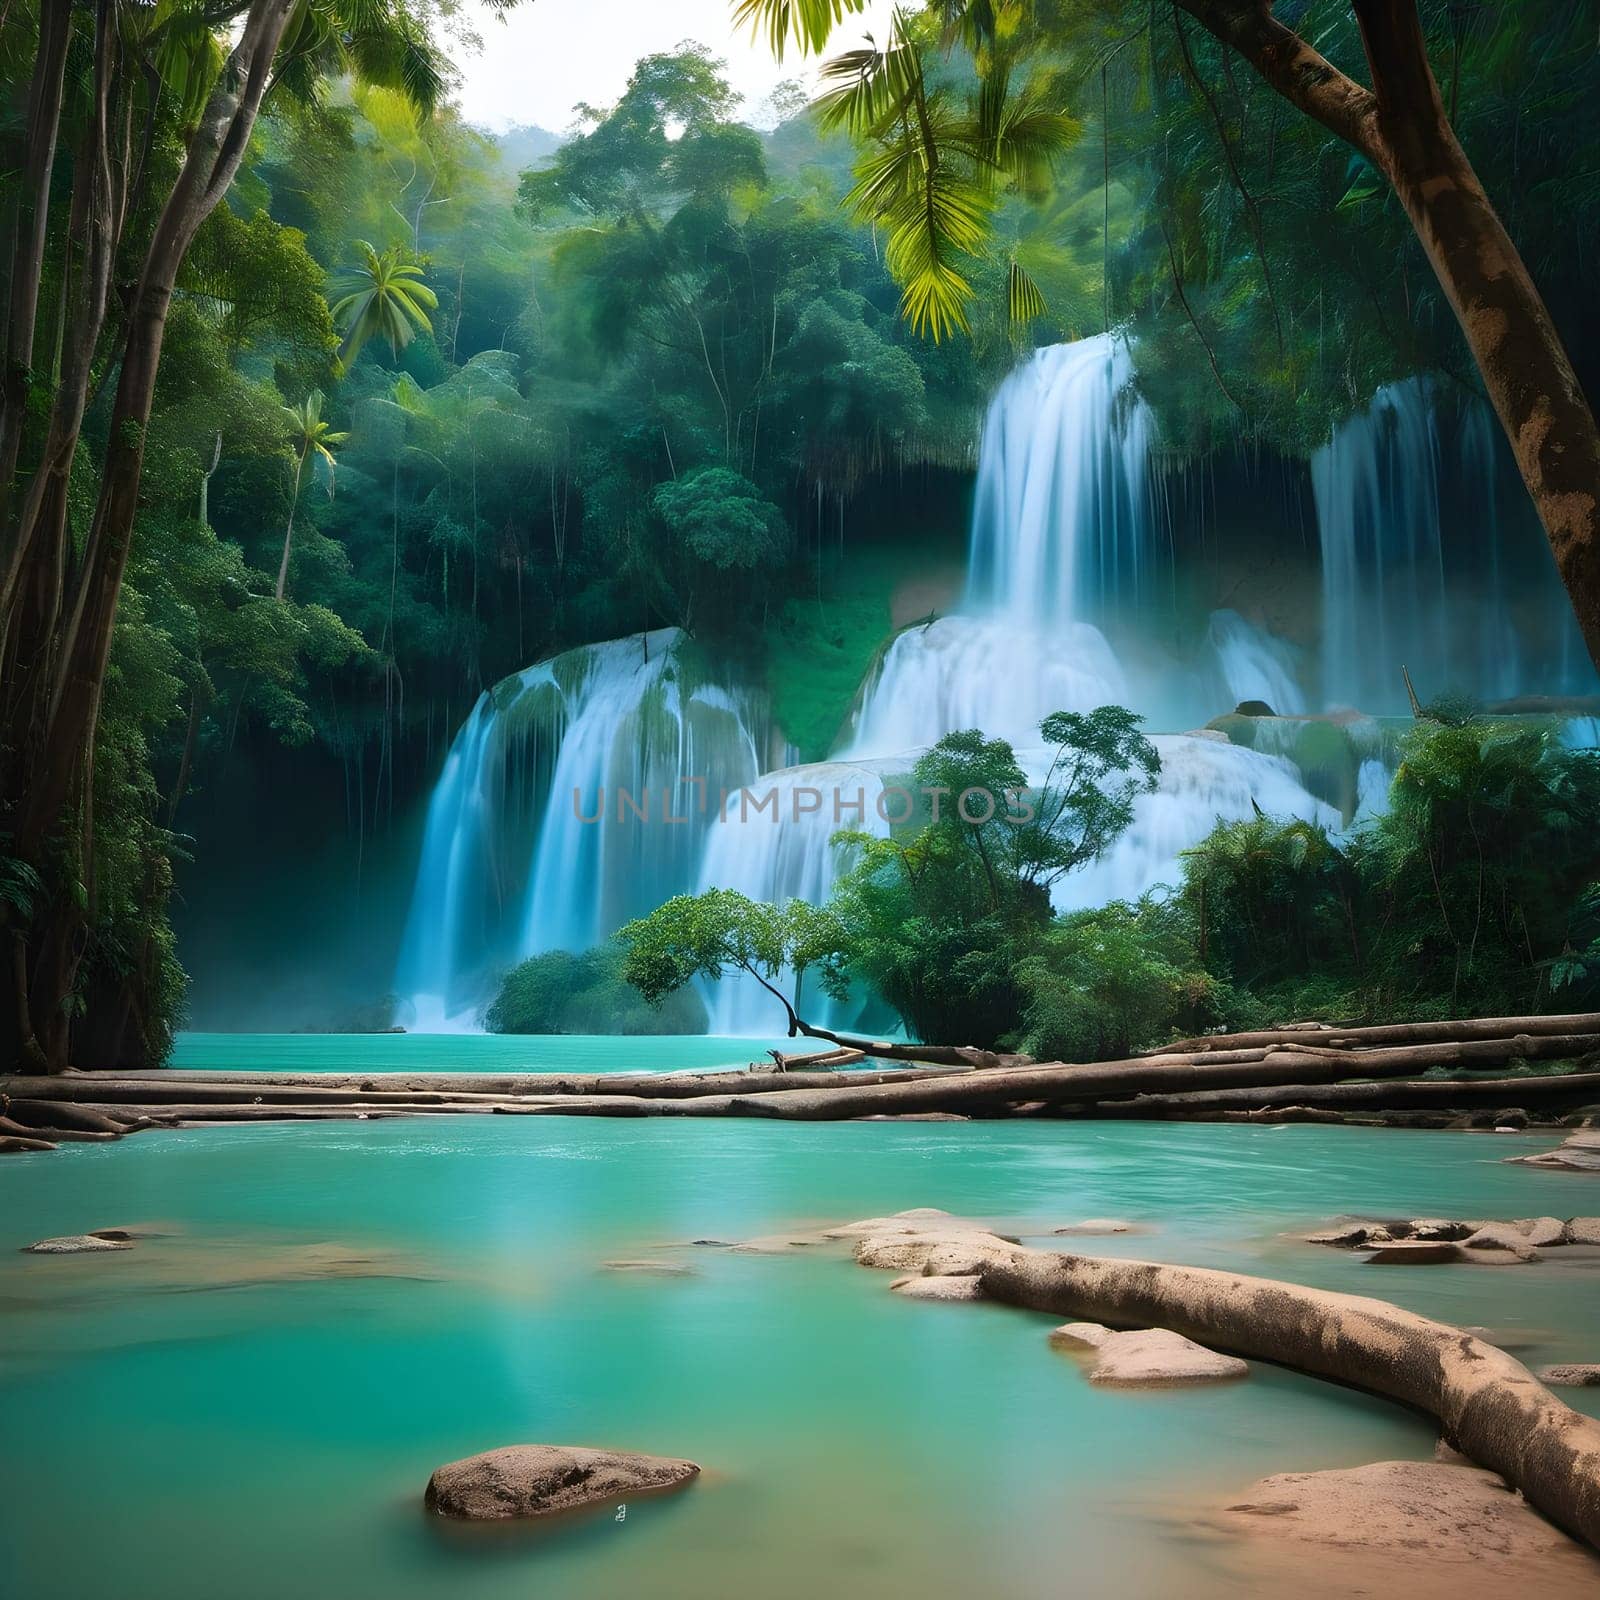 Serenade of Nature: Cascading Waters in the Tropical Rainforest